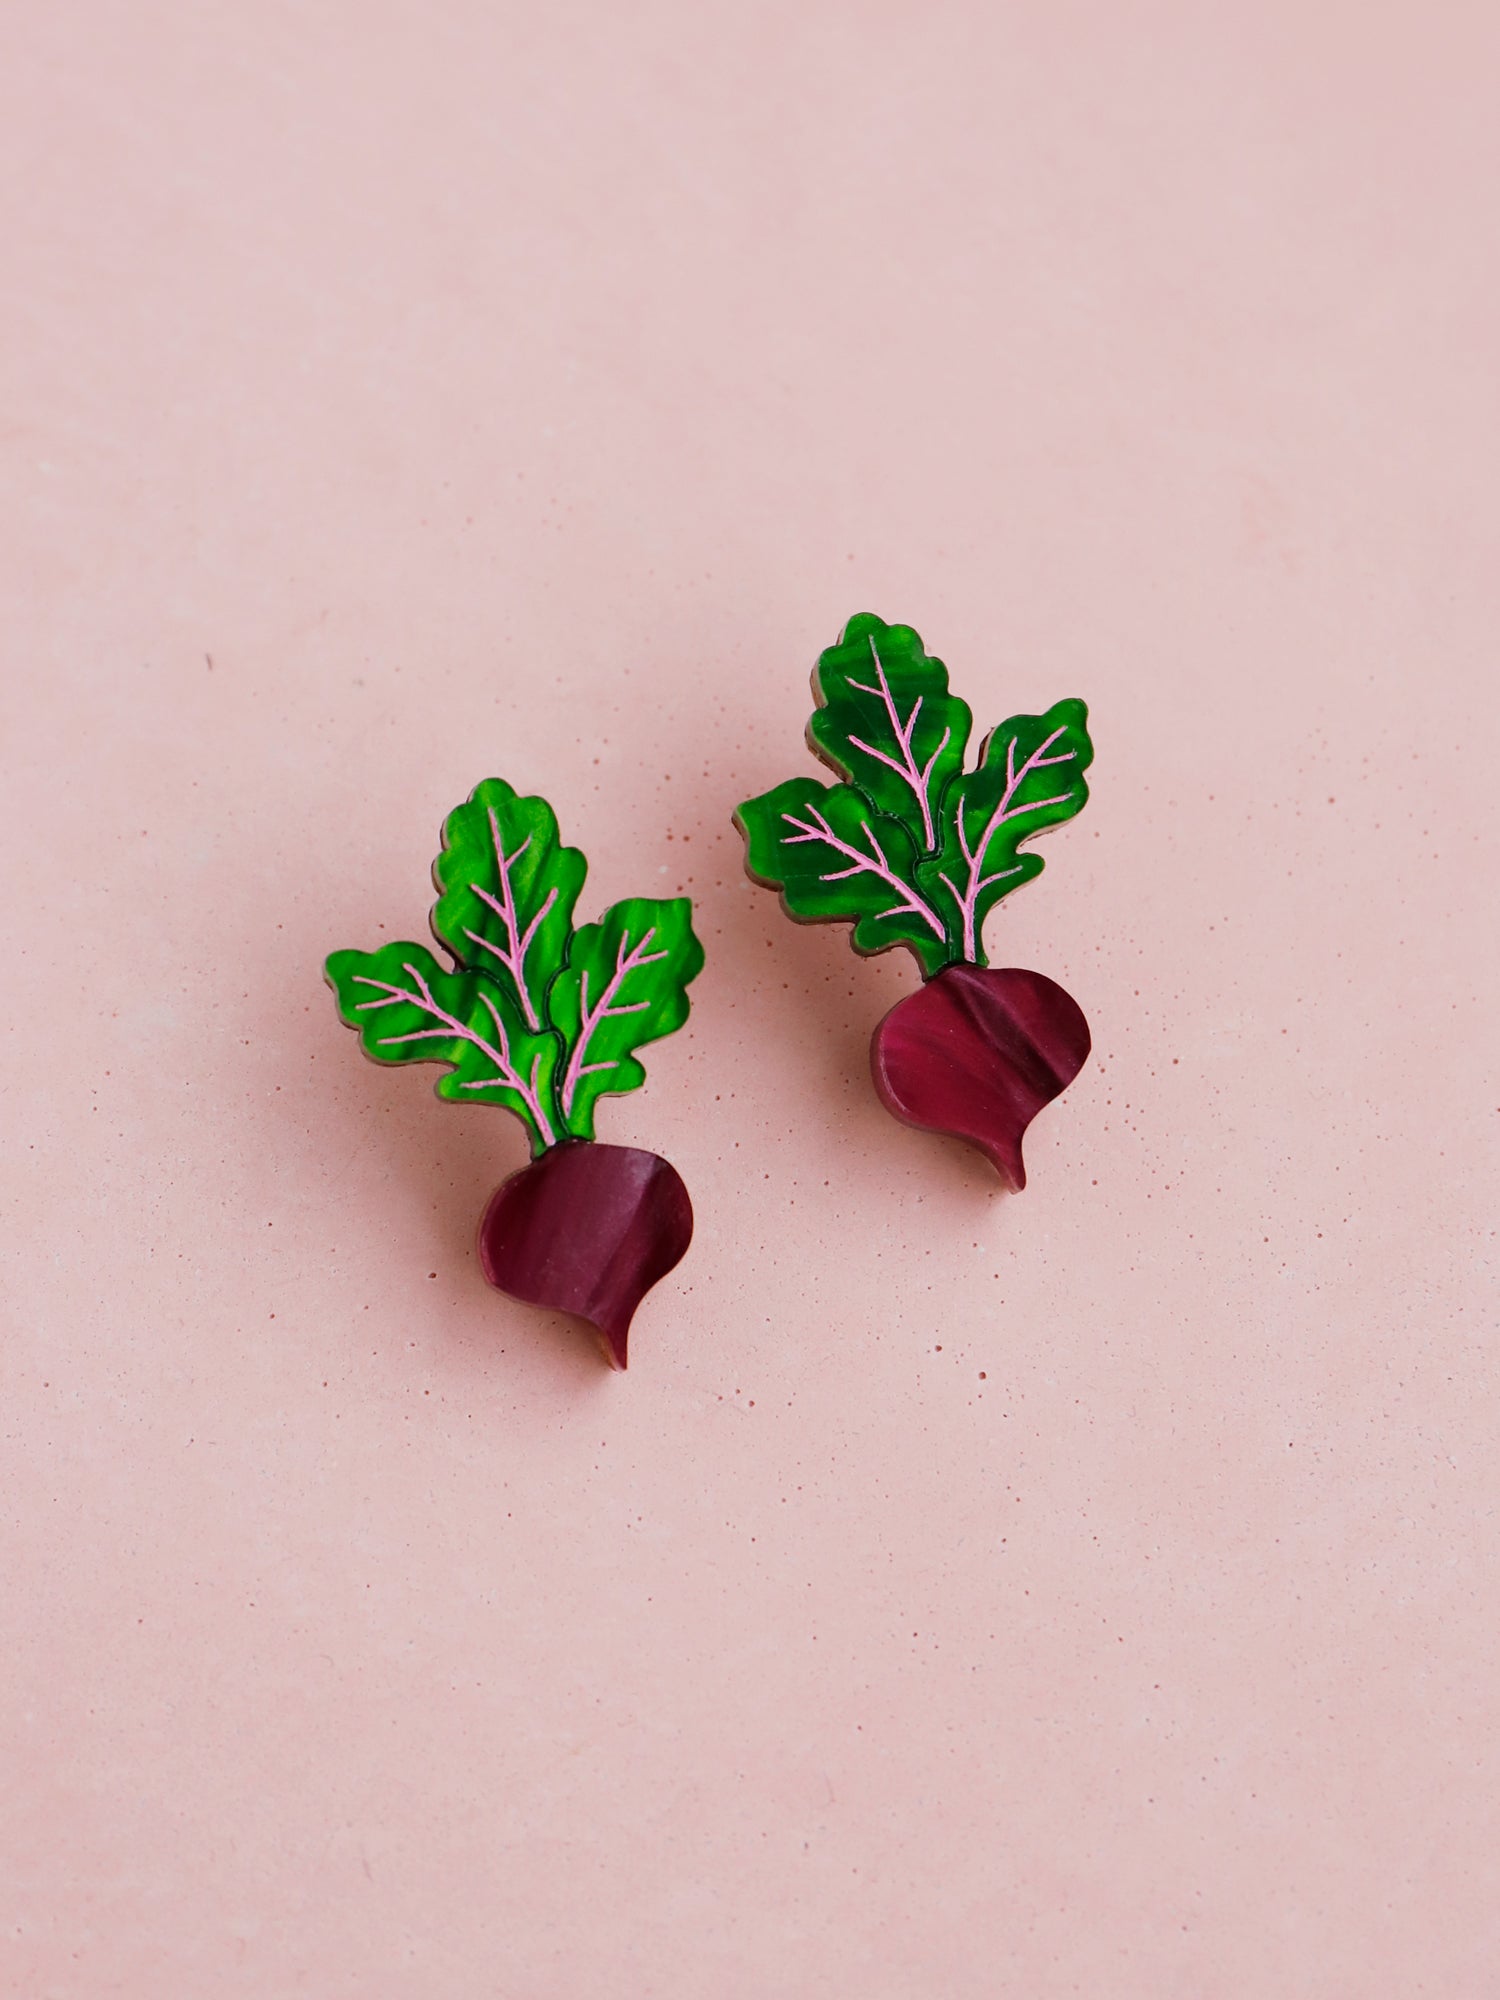 Purple and green hand-inked beetroot acrylic mini studs with silver posts. Handmade in London by Wolf & Moon.